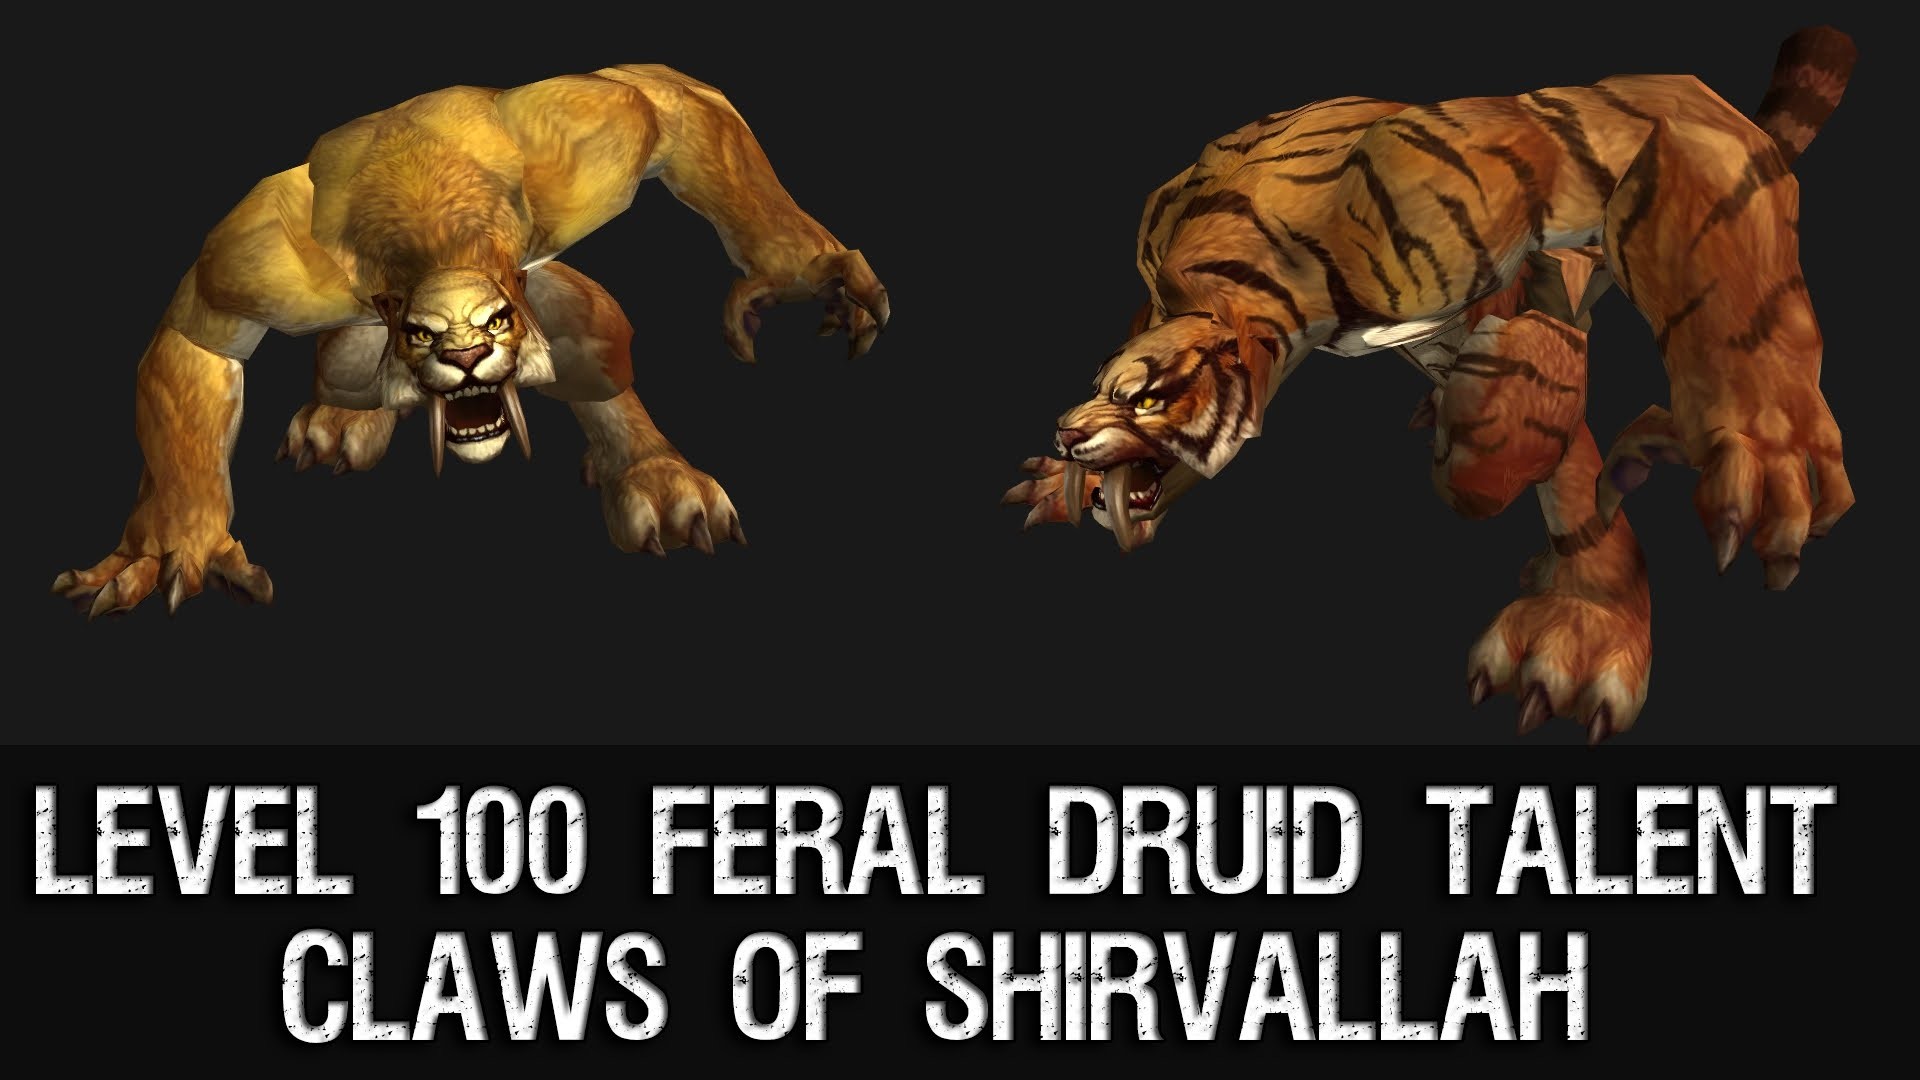 1920x1080 Claws of Shirvallah - Level 100 Feral Druid Talent